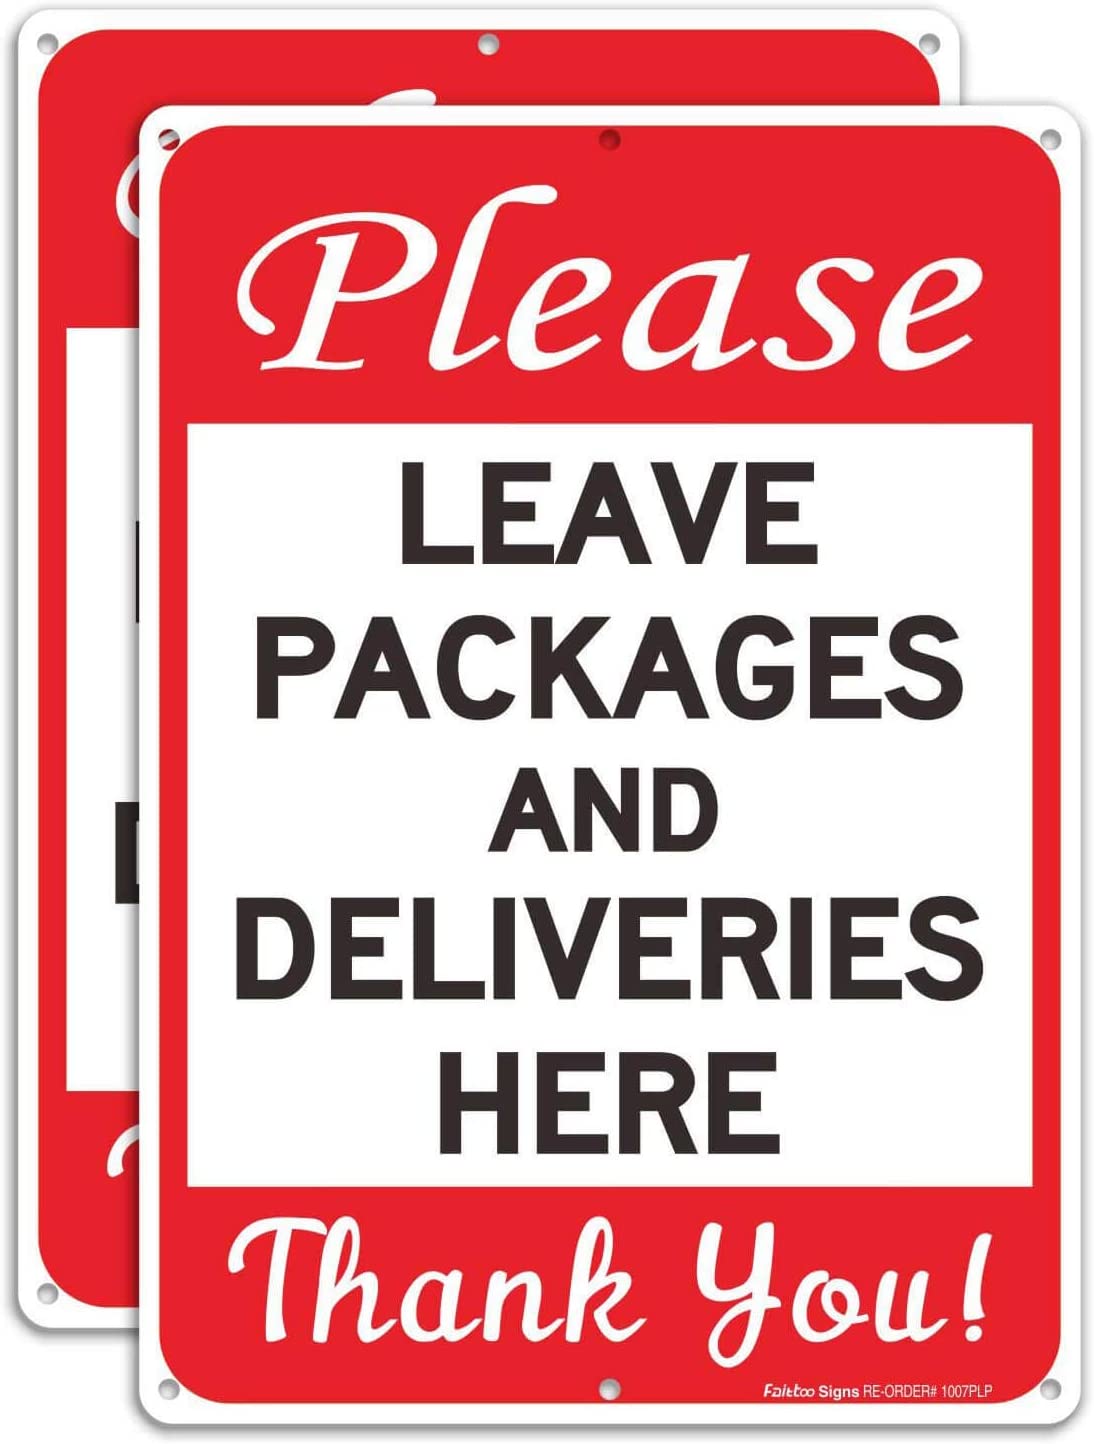 Faittoo Please Leave Packages and Deliveries Here Sign, Reflective Aluminum Sign, UV Protected and Weatherproof, Durable Ink, Easy to Install and Read, Indoor/ Outdoors Use